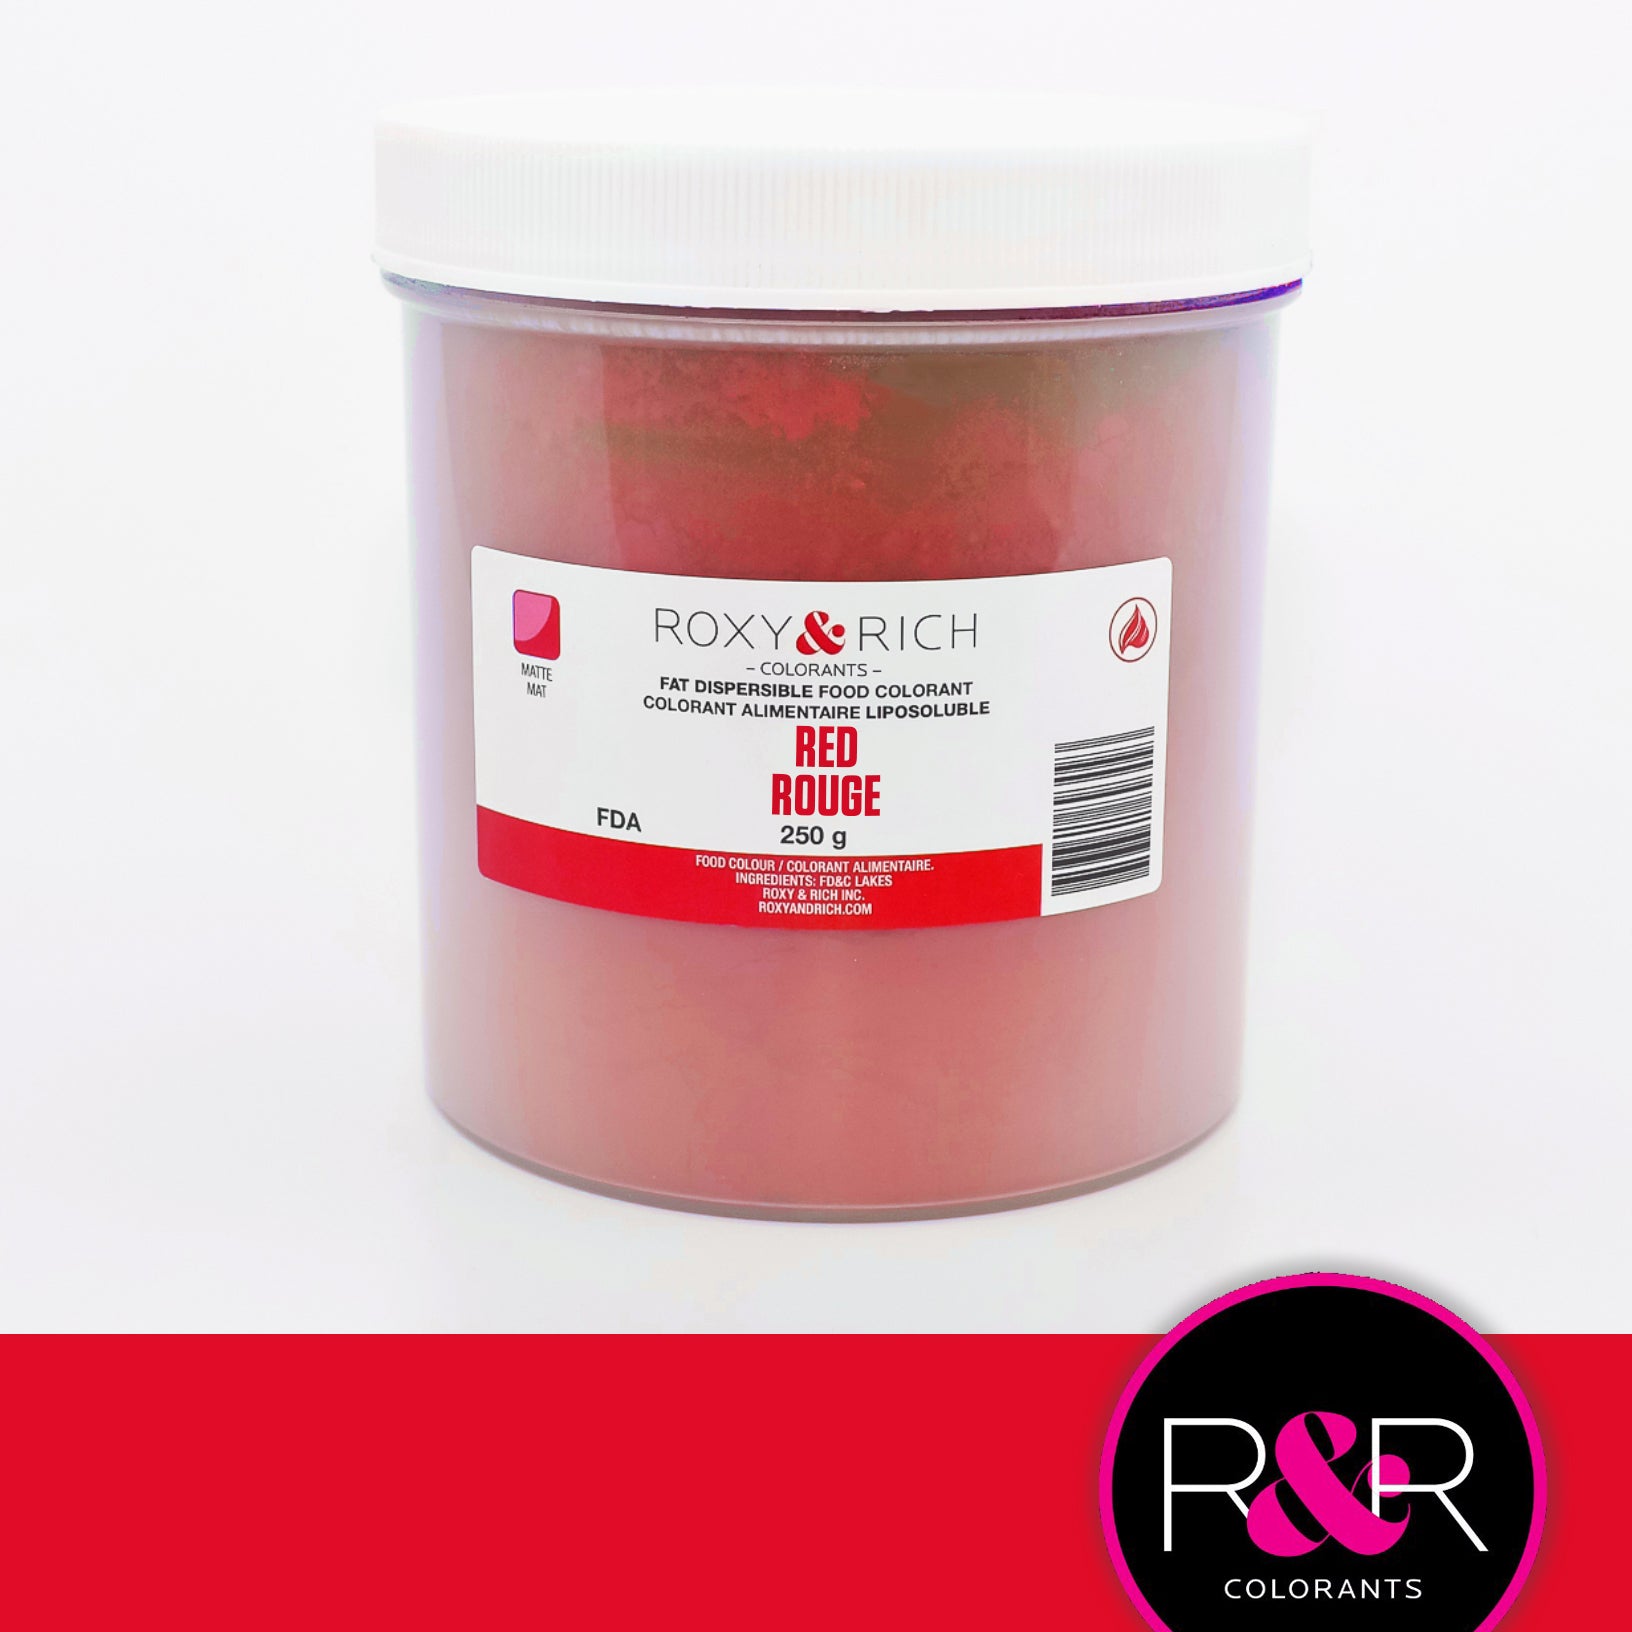 Colorant Alimentaire Liposoluble Rouge - Roxy & Rich